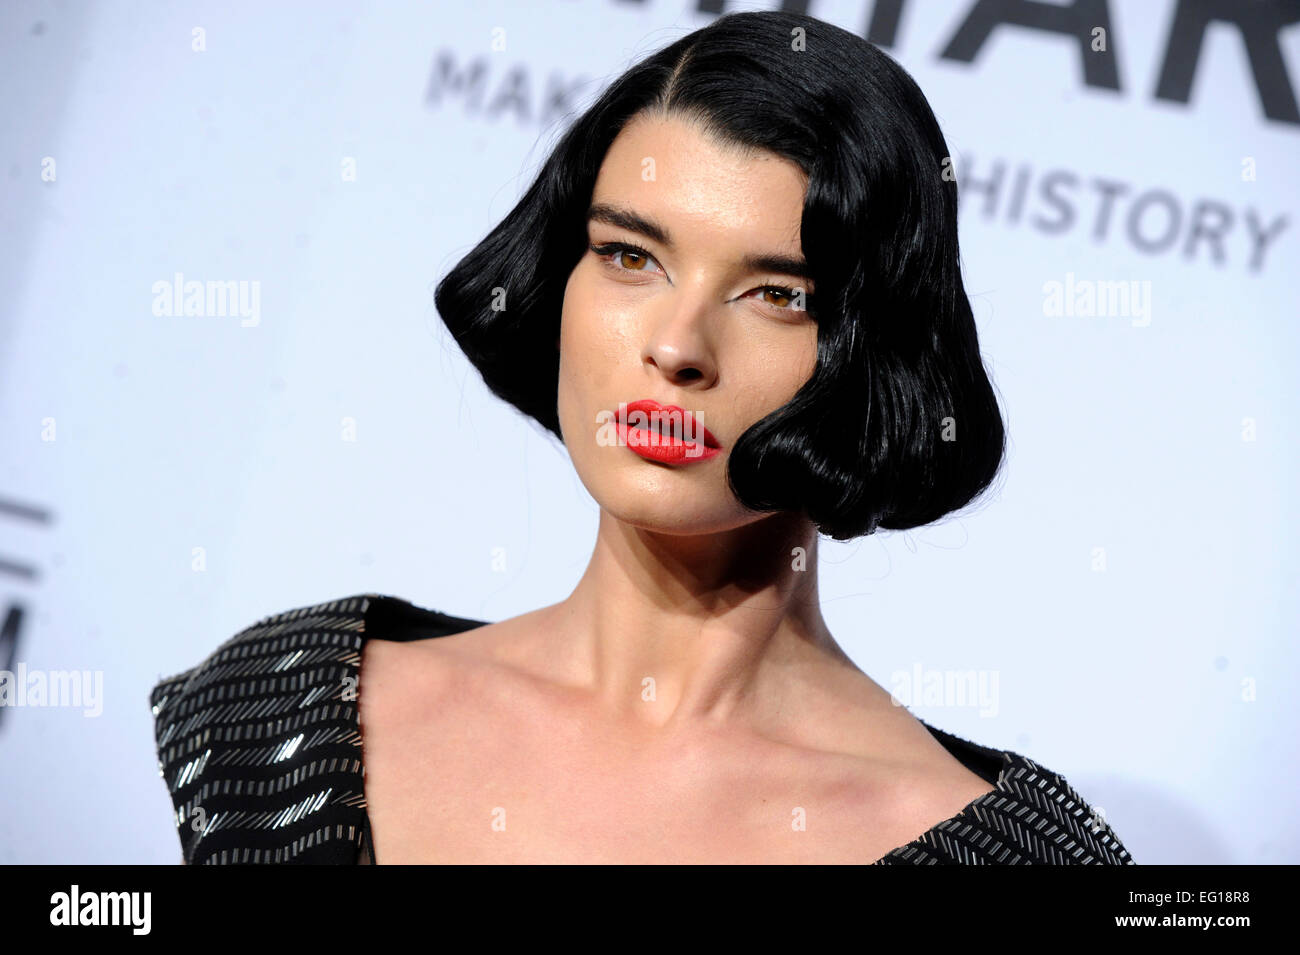 Crystal Renn attending the 2015 amfAR New York Gala at Cipriani Wall Street on February 11, 2015 in New York City/picture alliance Stock Photo